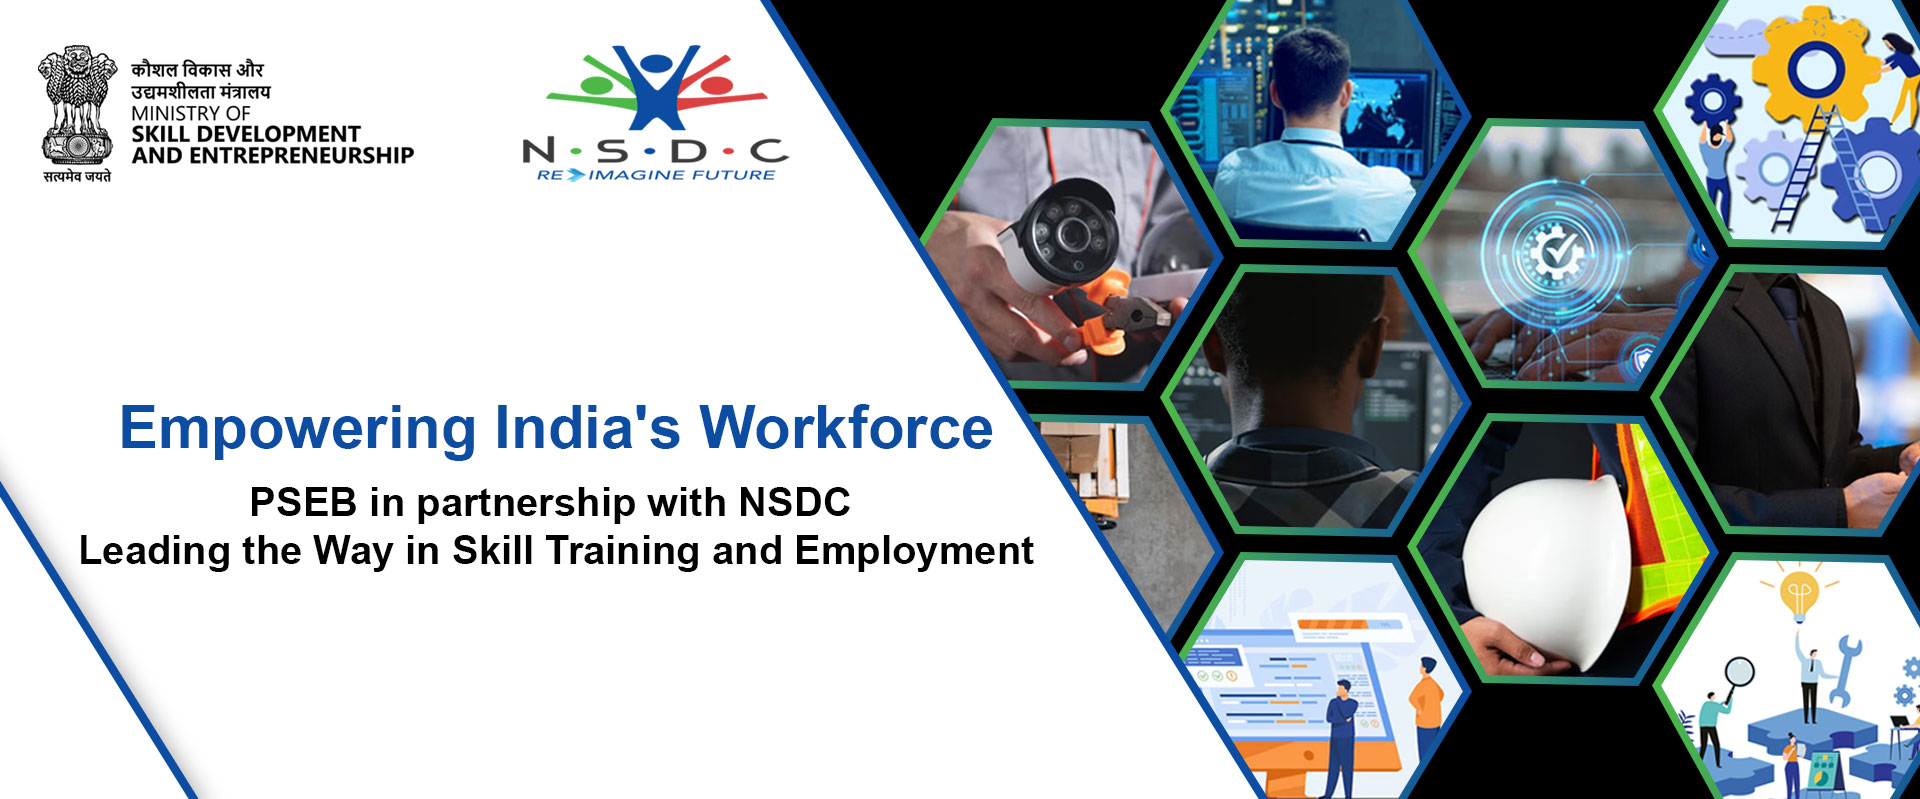 The/Nudge Foundation collaborates with NSDC to launch CSDE